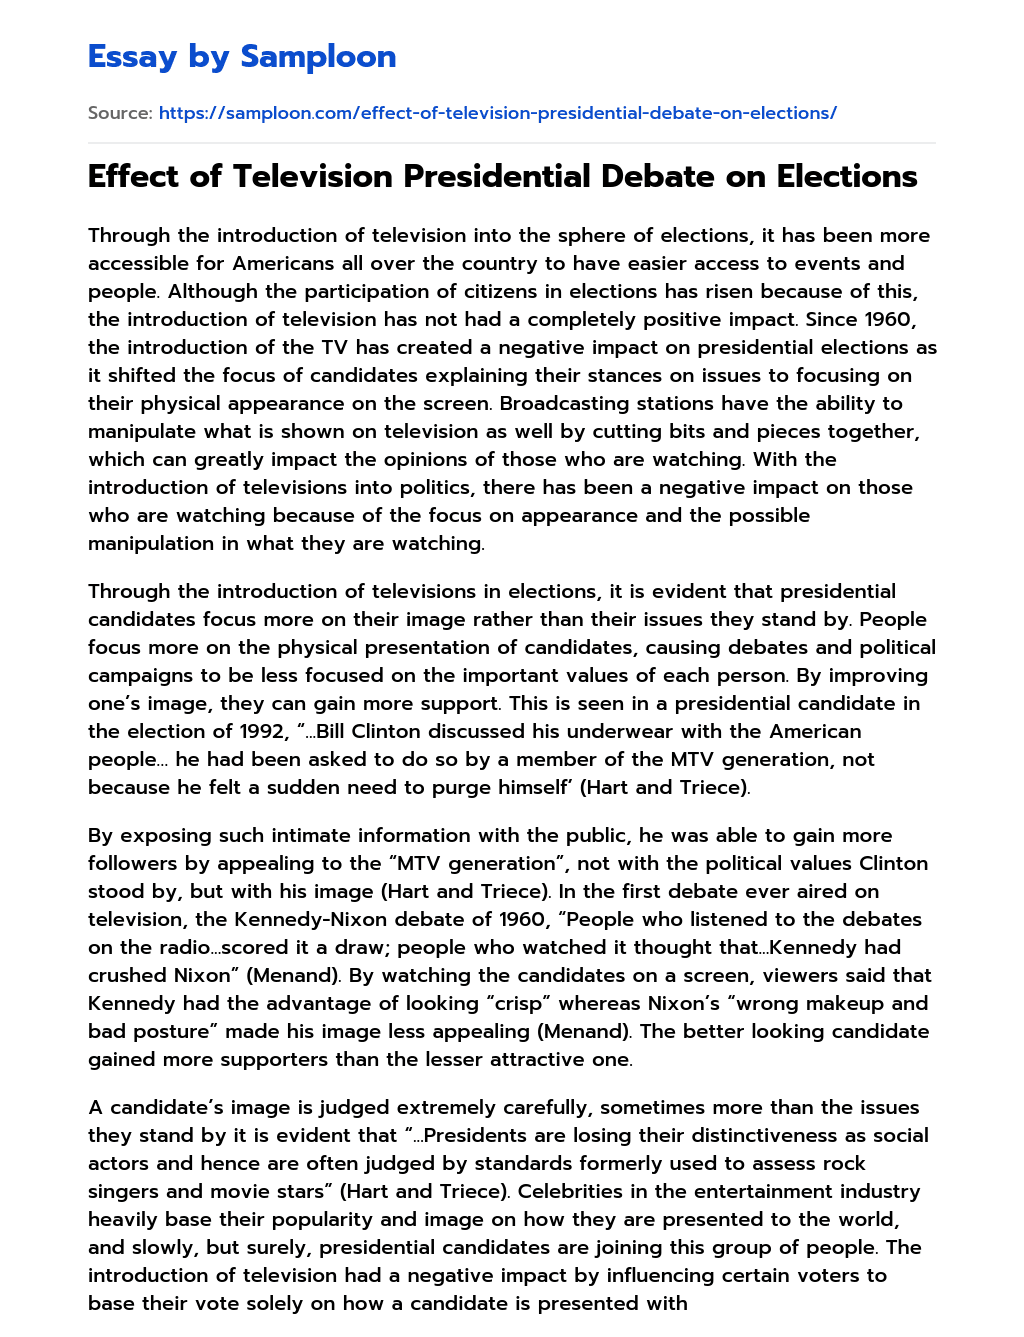 Effect of Television Presidential Debate on Elections essay